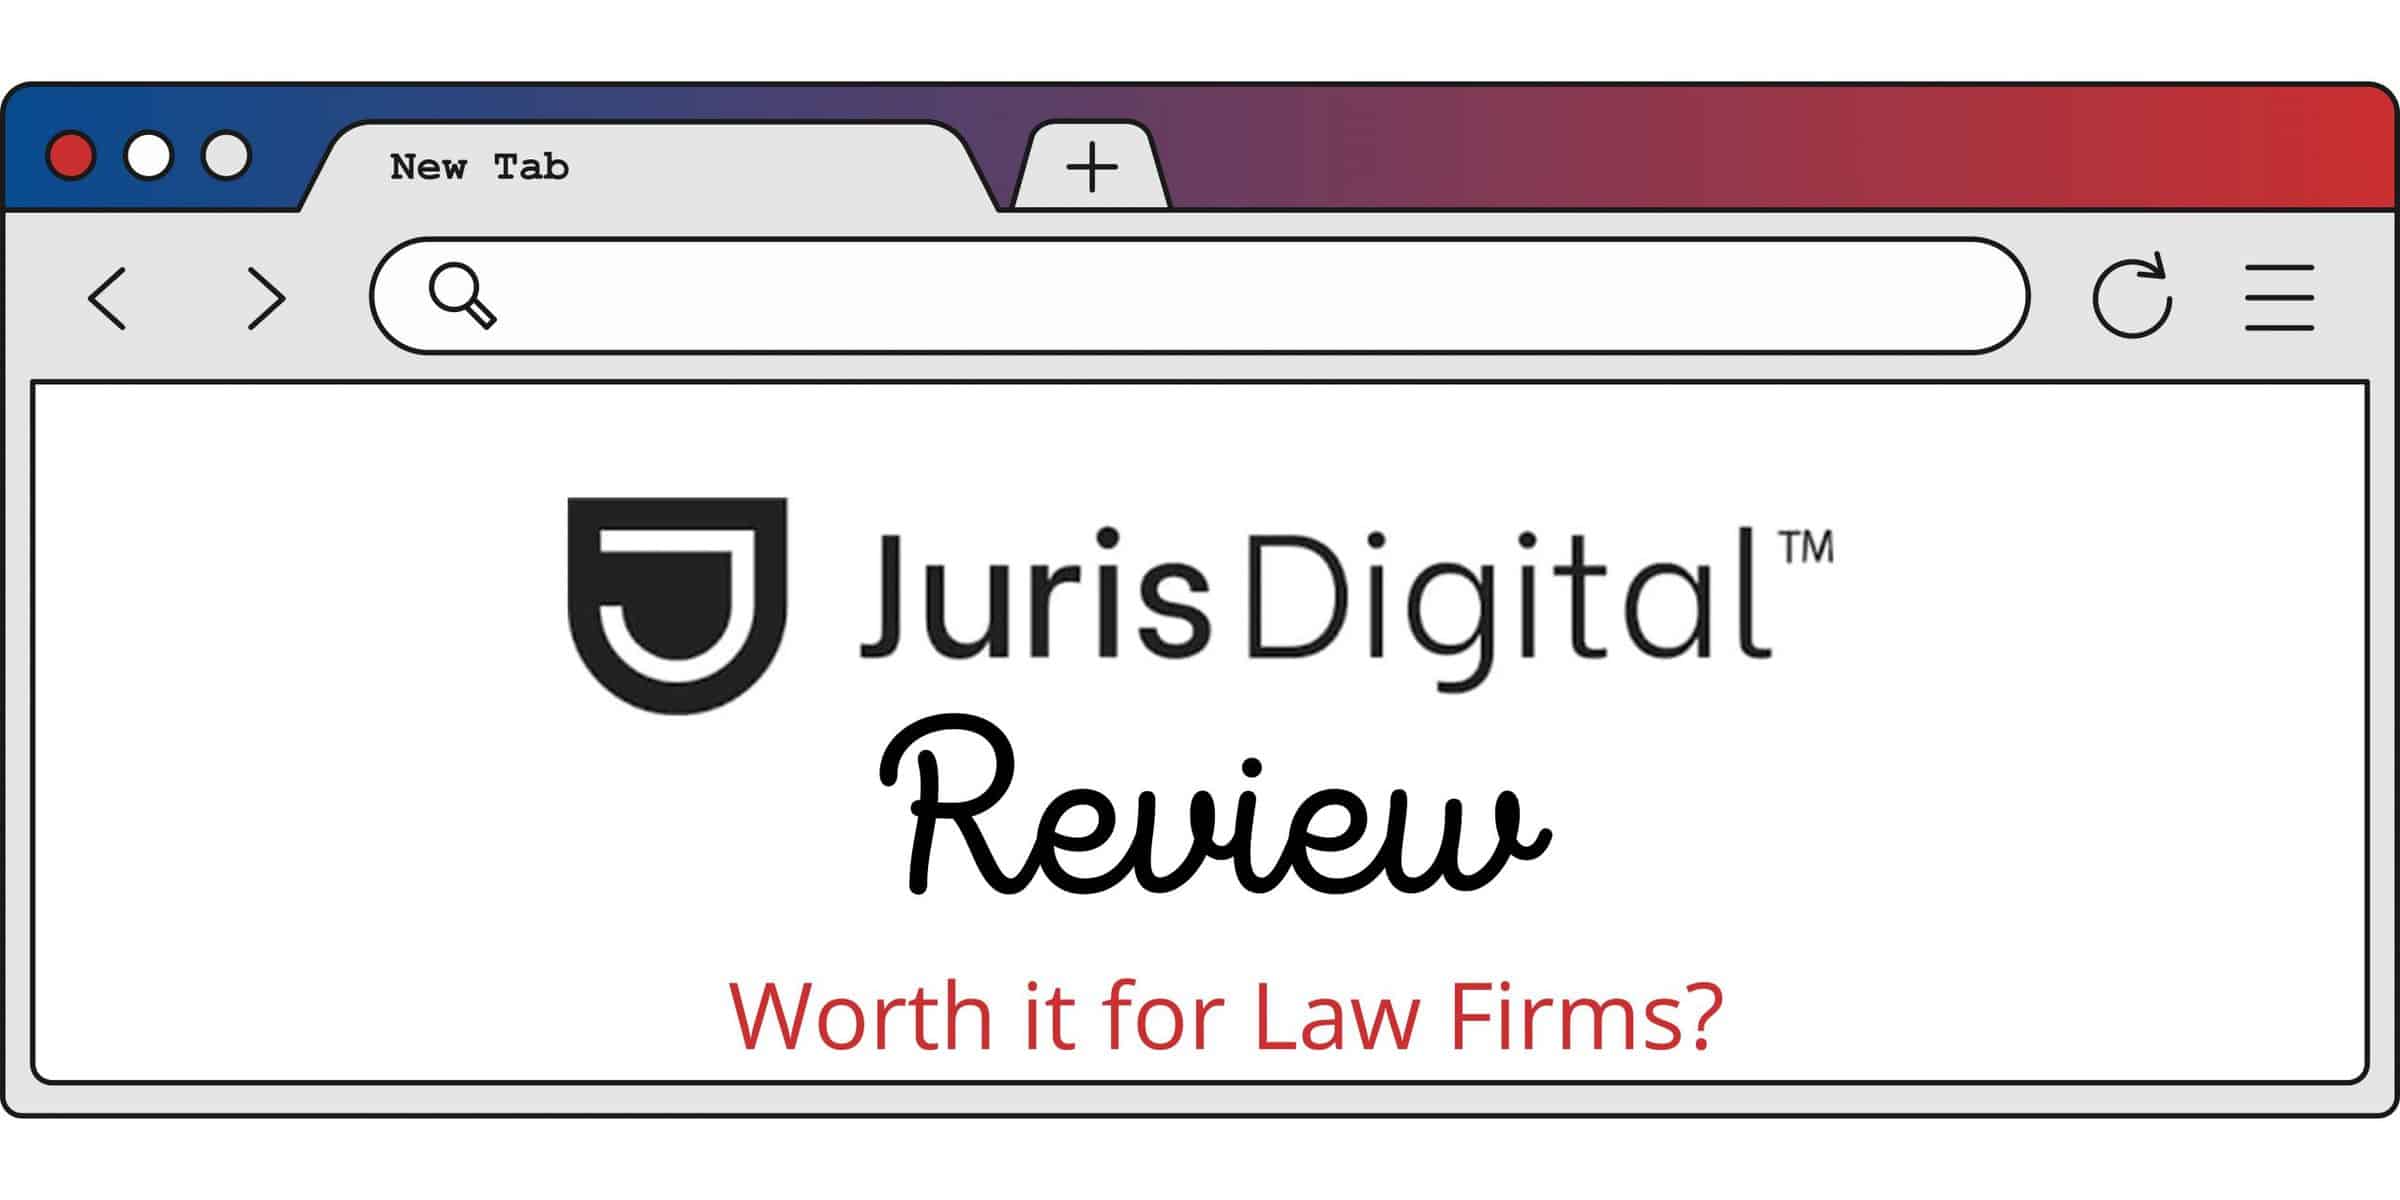 Juris Digital Review Marketing for Law Firms